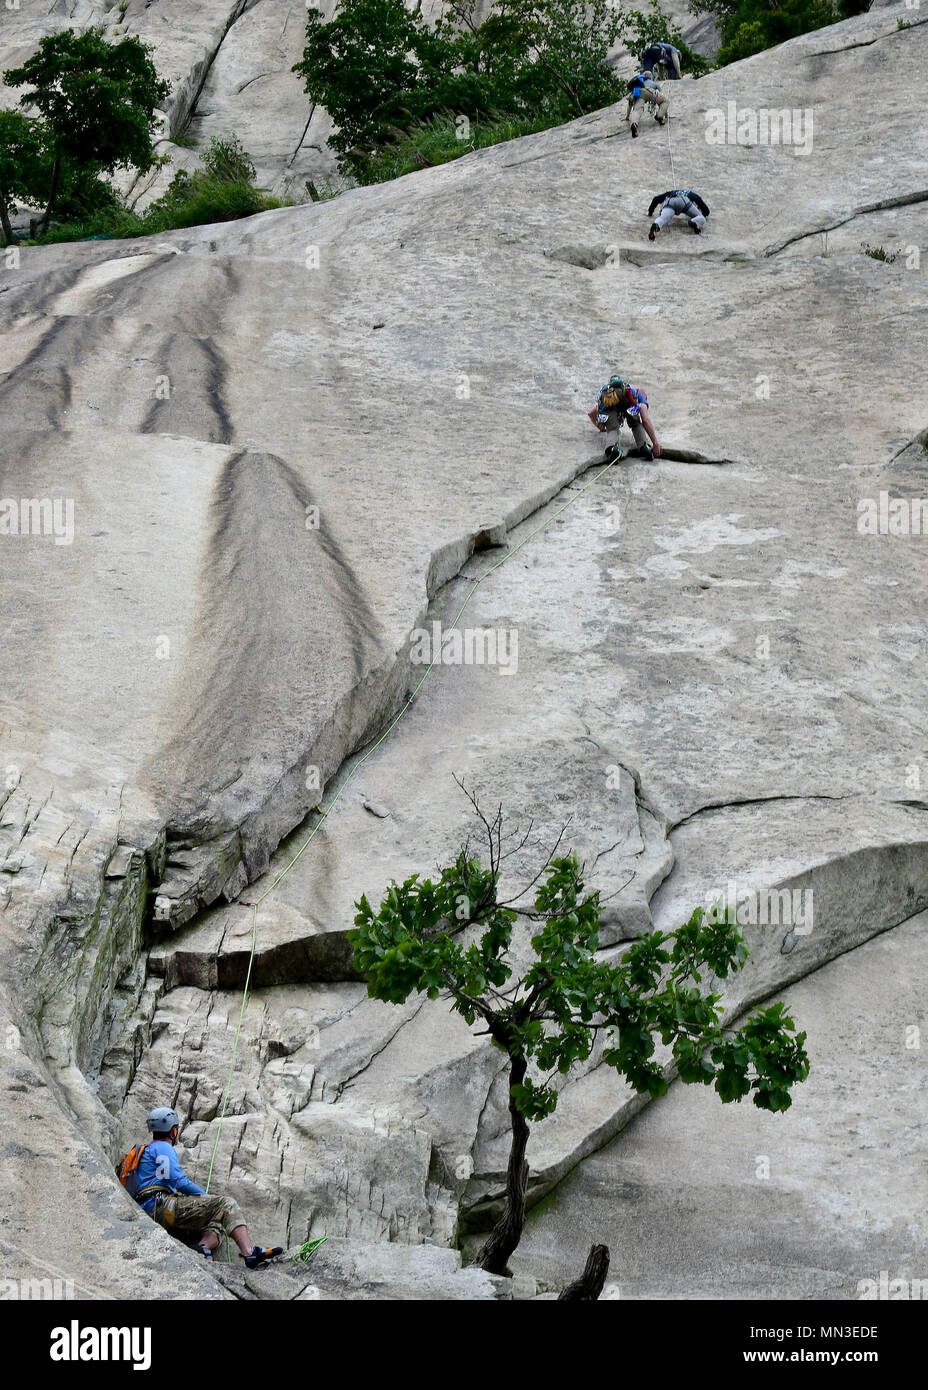 Members assigned to the 51st Civil Engineer Squadron Explosive Ordnance Disposal shop, climb a mountain during a Mountain Mobility Course at Bhukansan National Park, City of Seoul, Republic of Korea on August 30, 2017. The course allowed members to learn t procedures and techniques that go into mountain climbing. (U.S. Air Force photo by Staff Sgt. Franklin R. Ramos/Released) Stock Photo